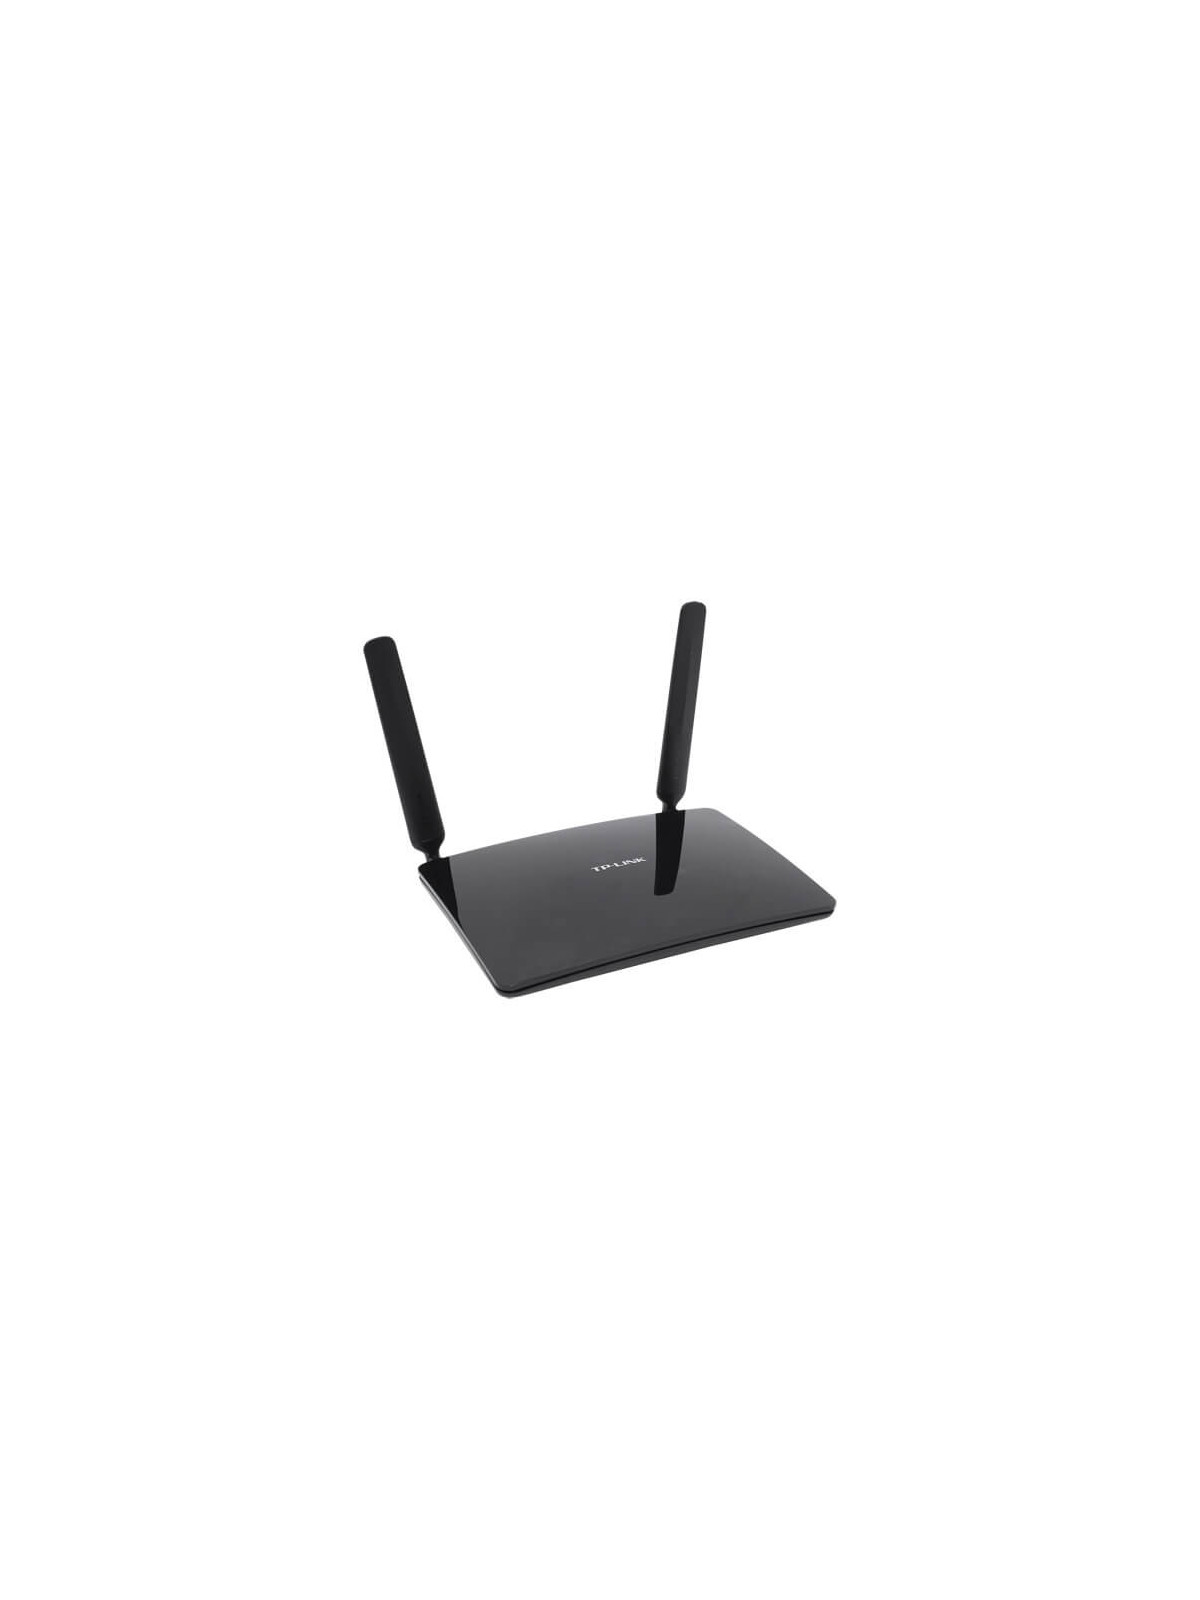 Router   TP-Link TL-MR6400 4G Wifi LANx3